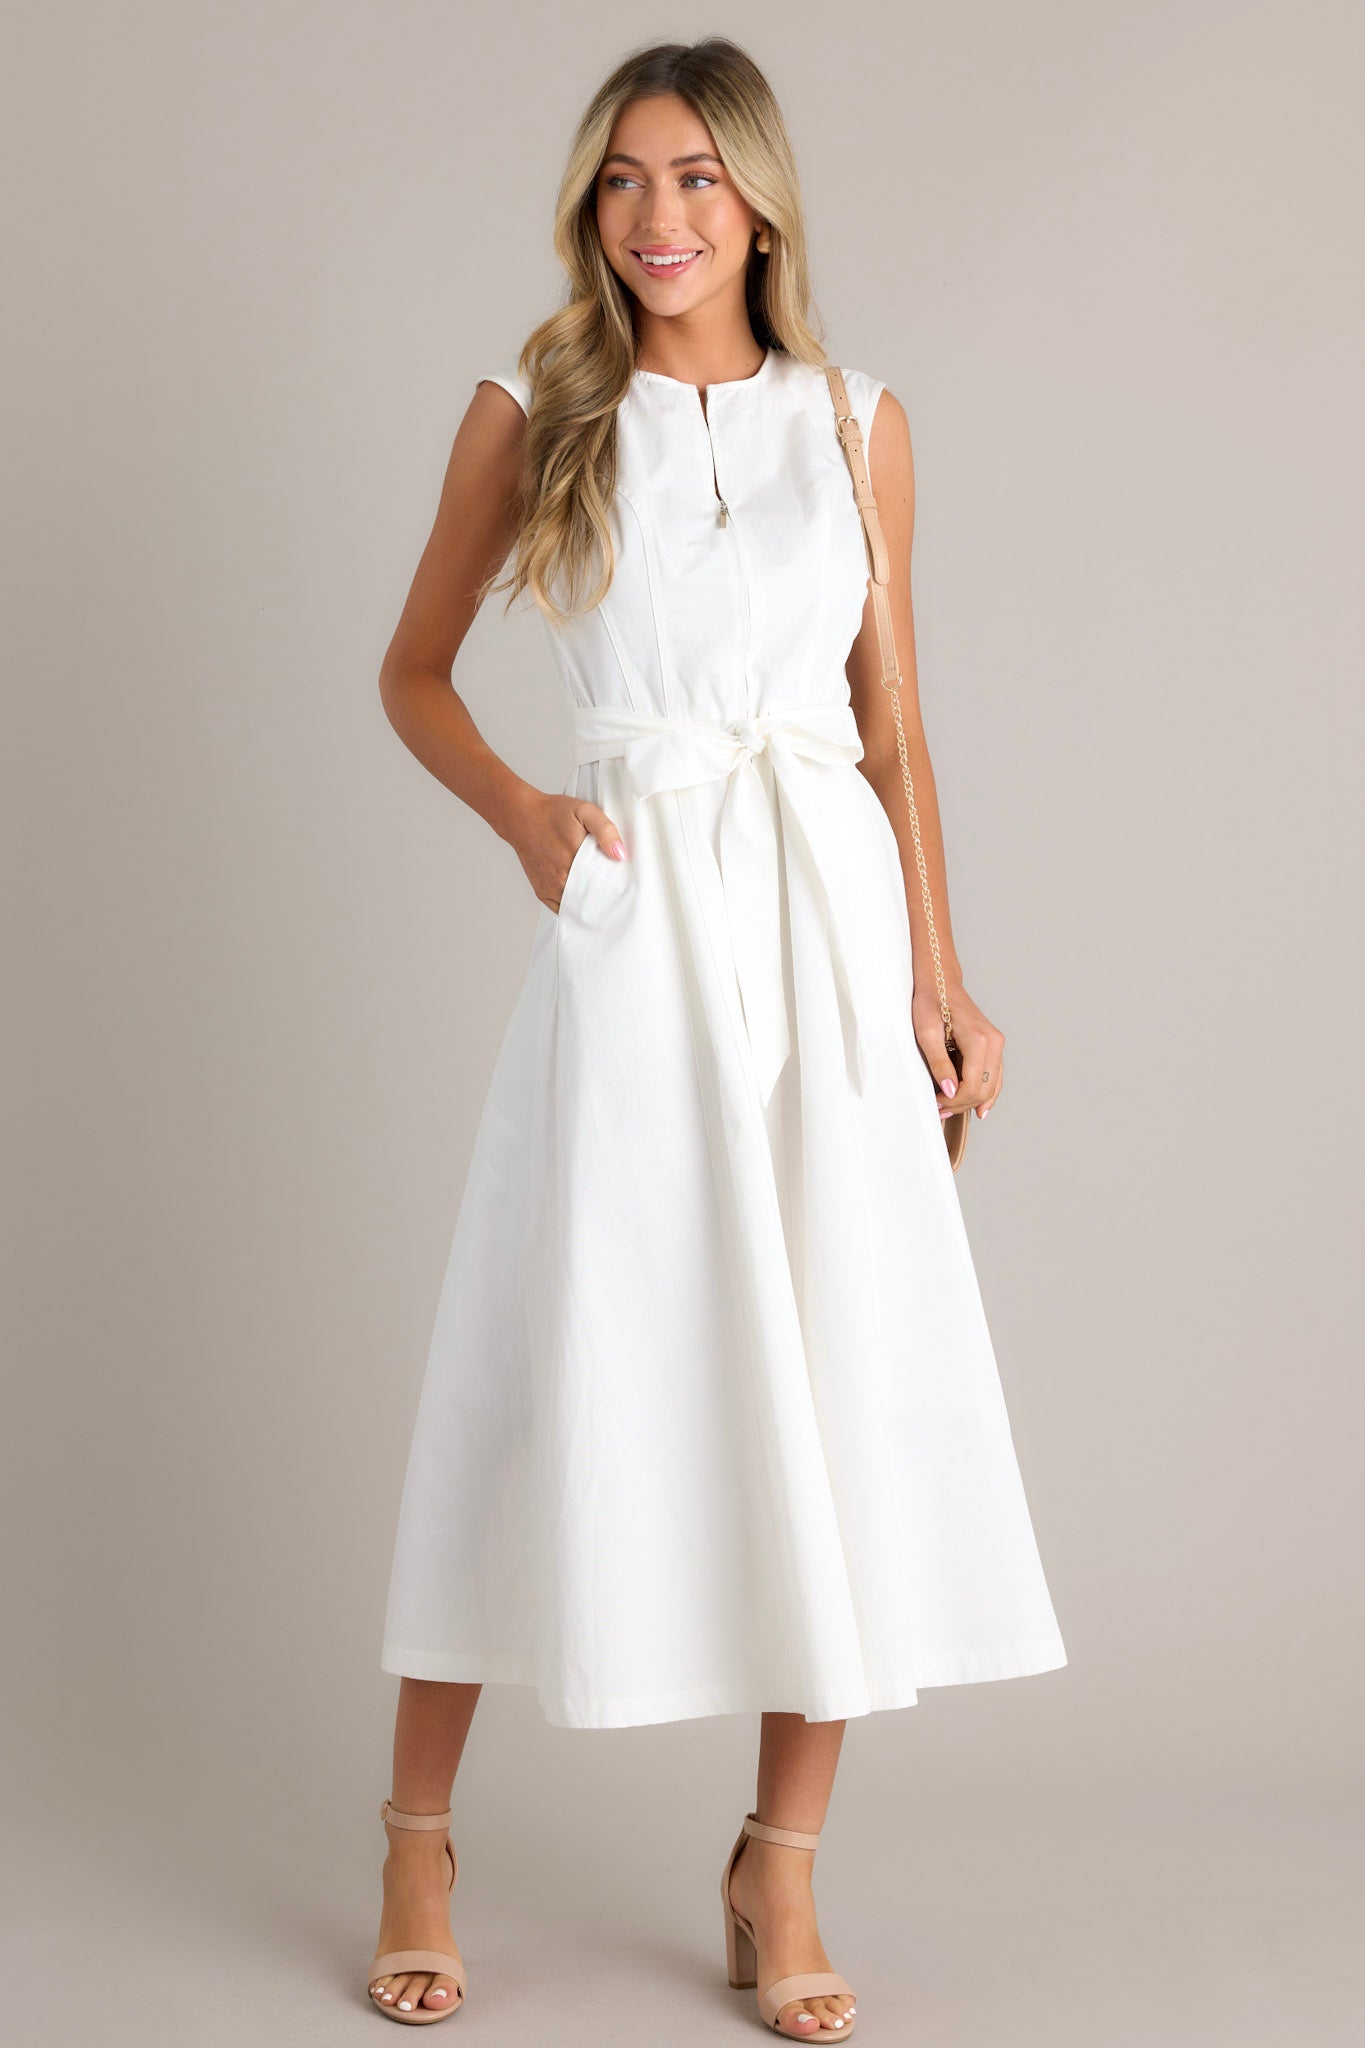 Full body view of this white midi dress that features a round neckline, a zipper front, visible front & back seams, a self-tie waist belt, belt loops, functional hip pockets, and a flowing silhouette.